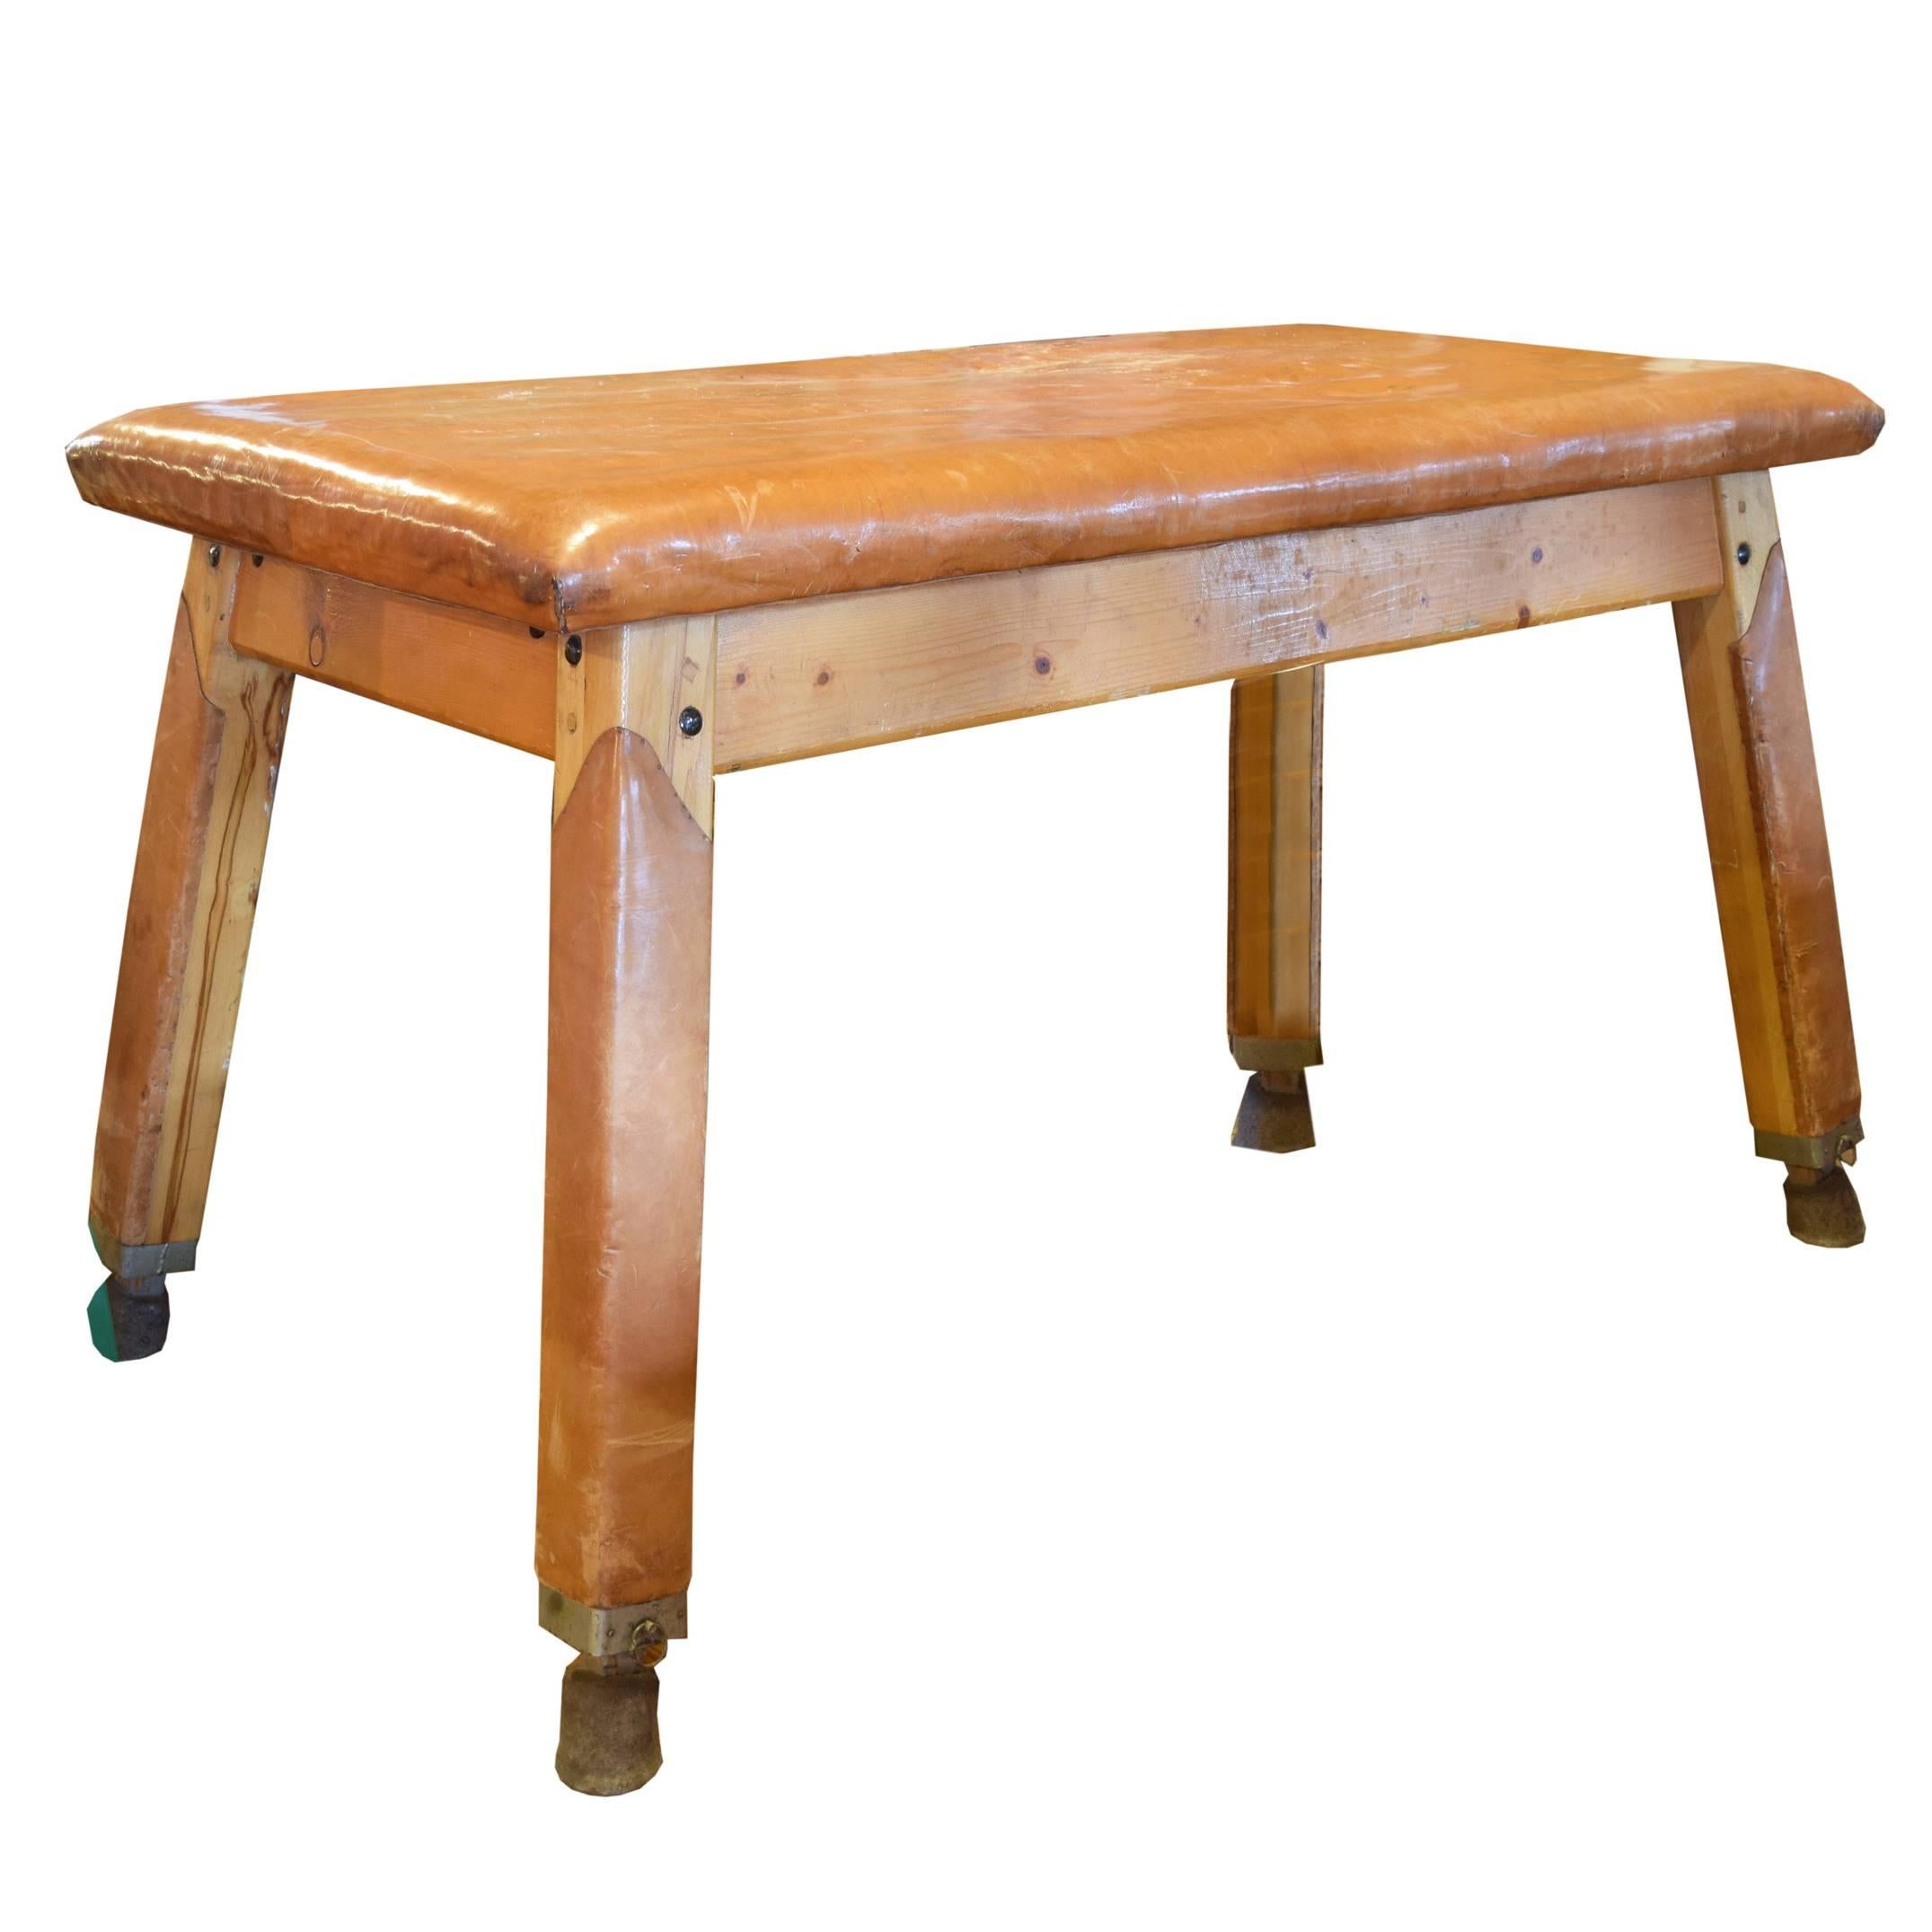 Vintage Leather and Wood Vaulting Table